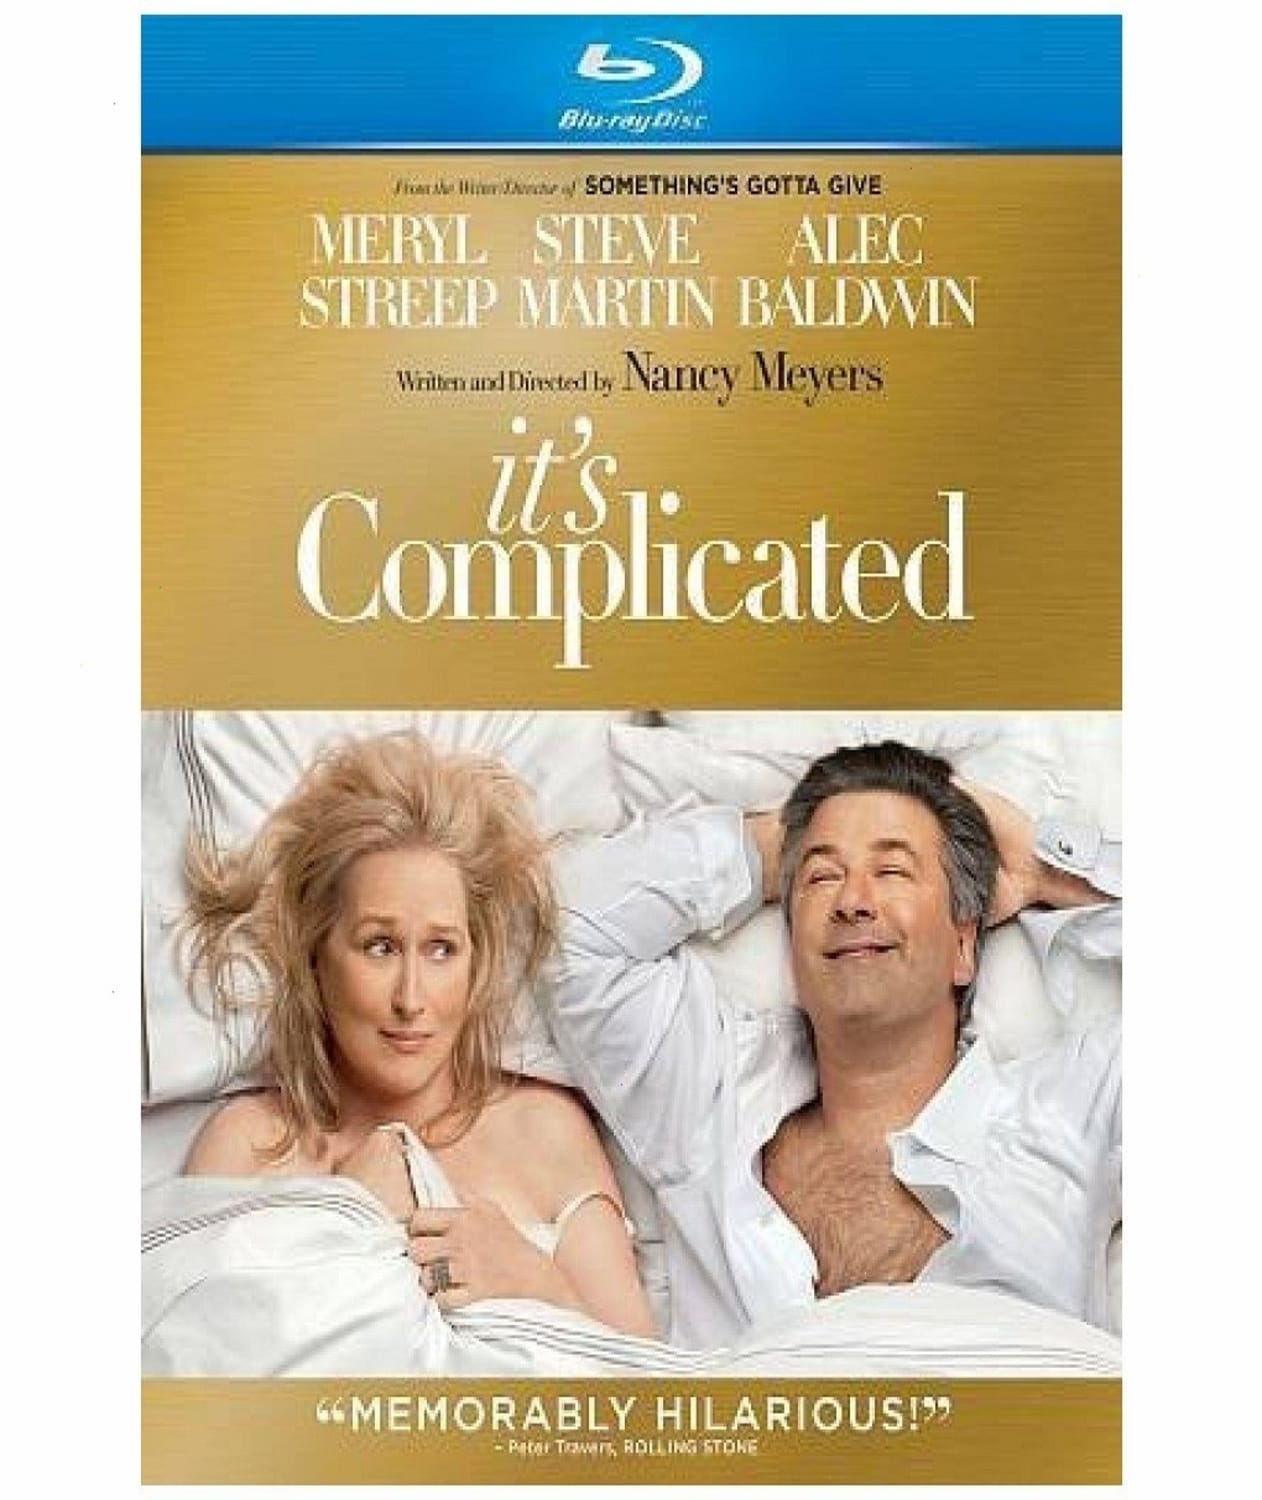 It’s Complicated (Blu-ray)